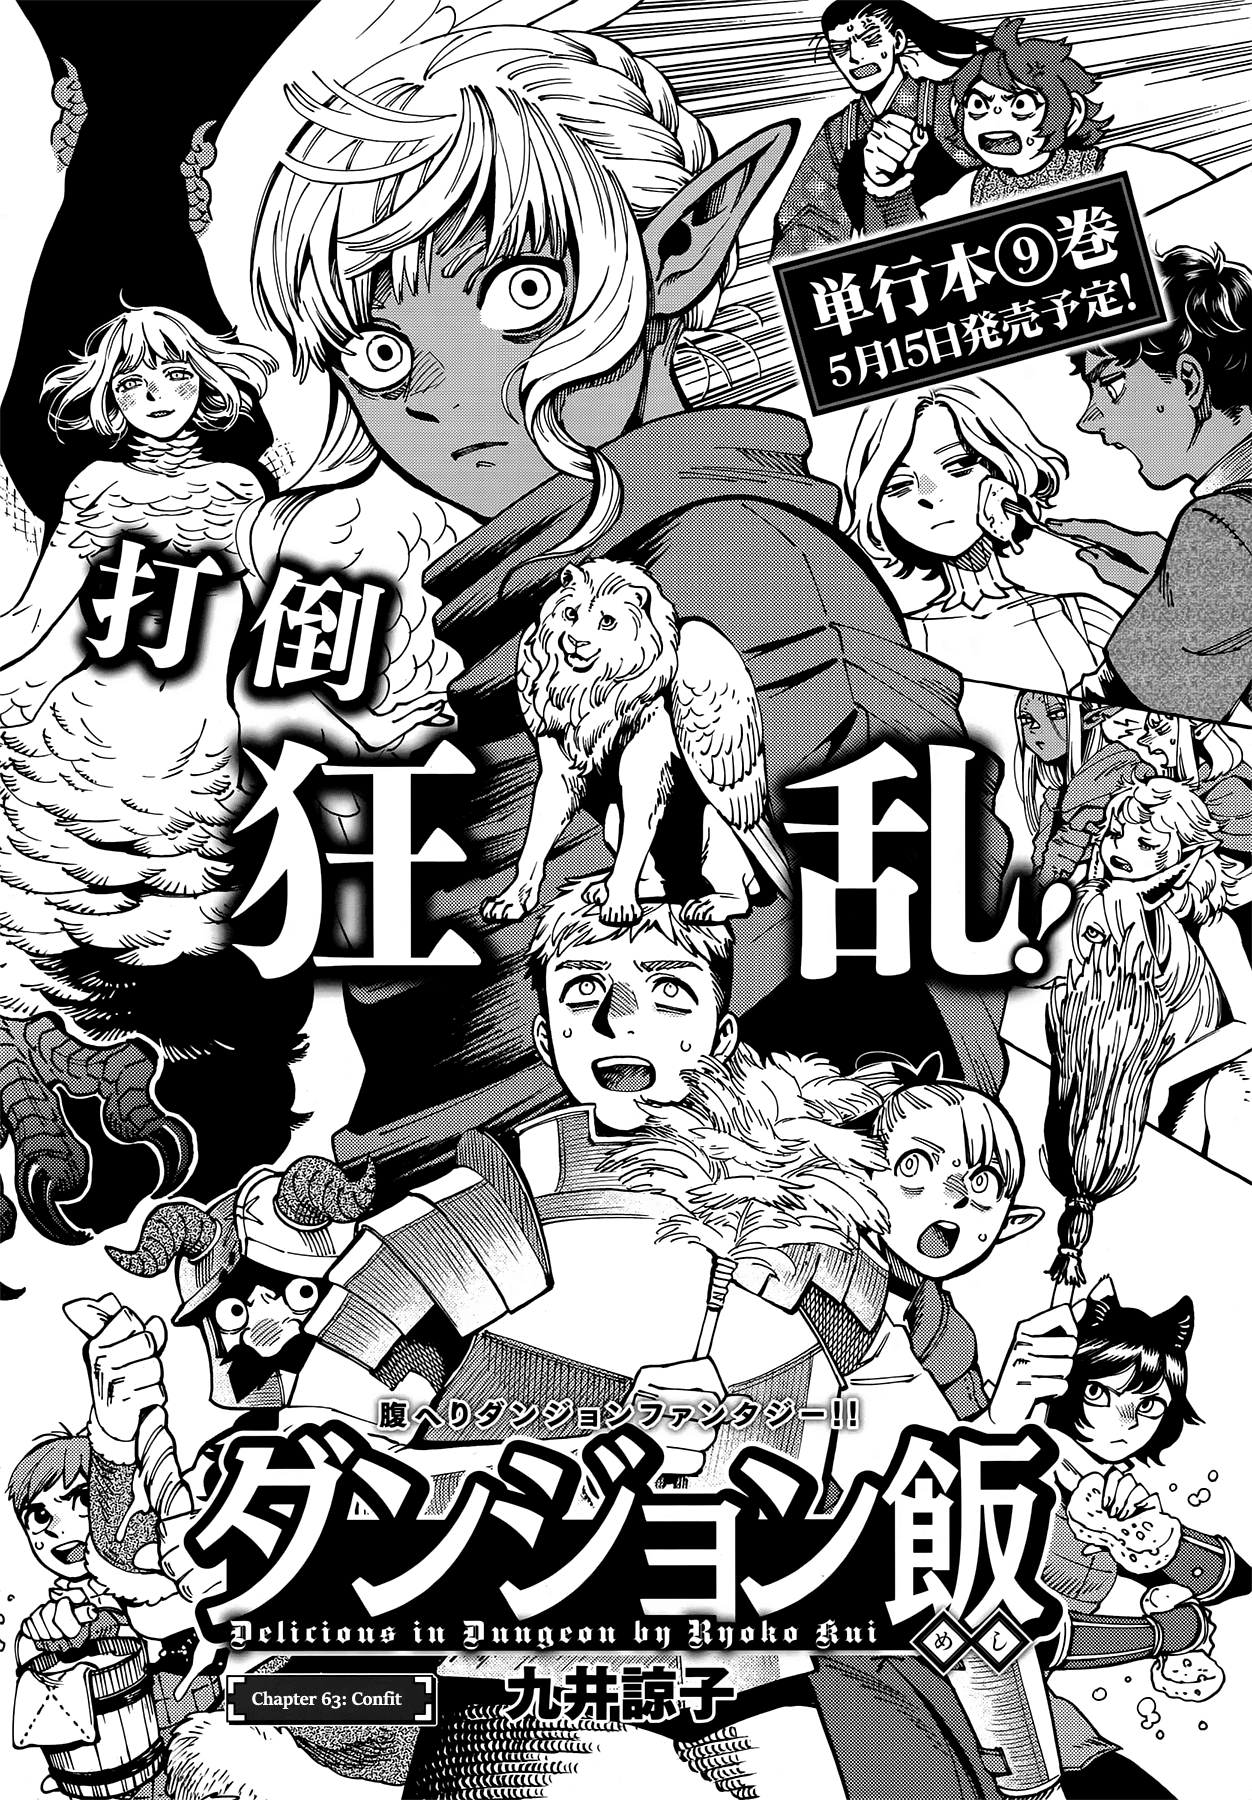 Dungeon Meshi Vol.10-Chapter.63-Confit Image